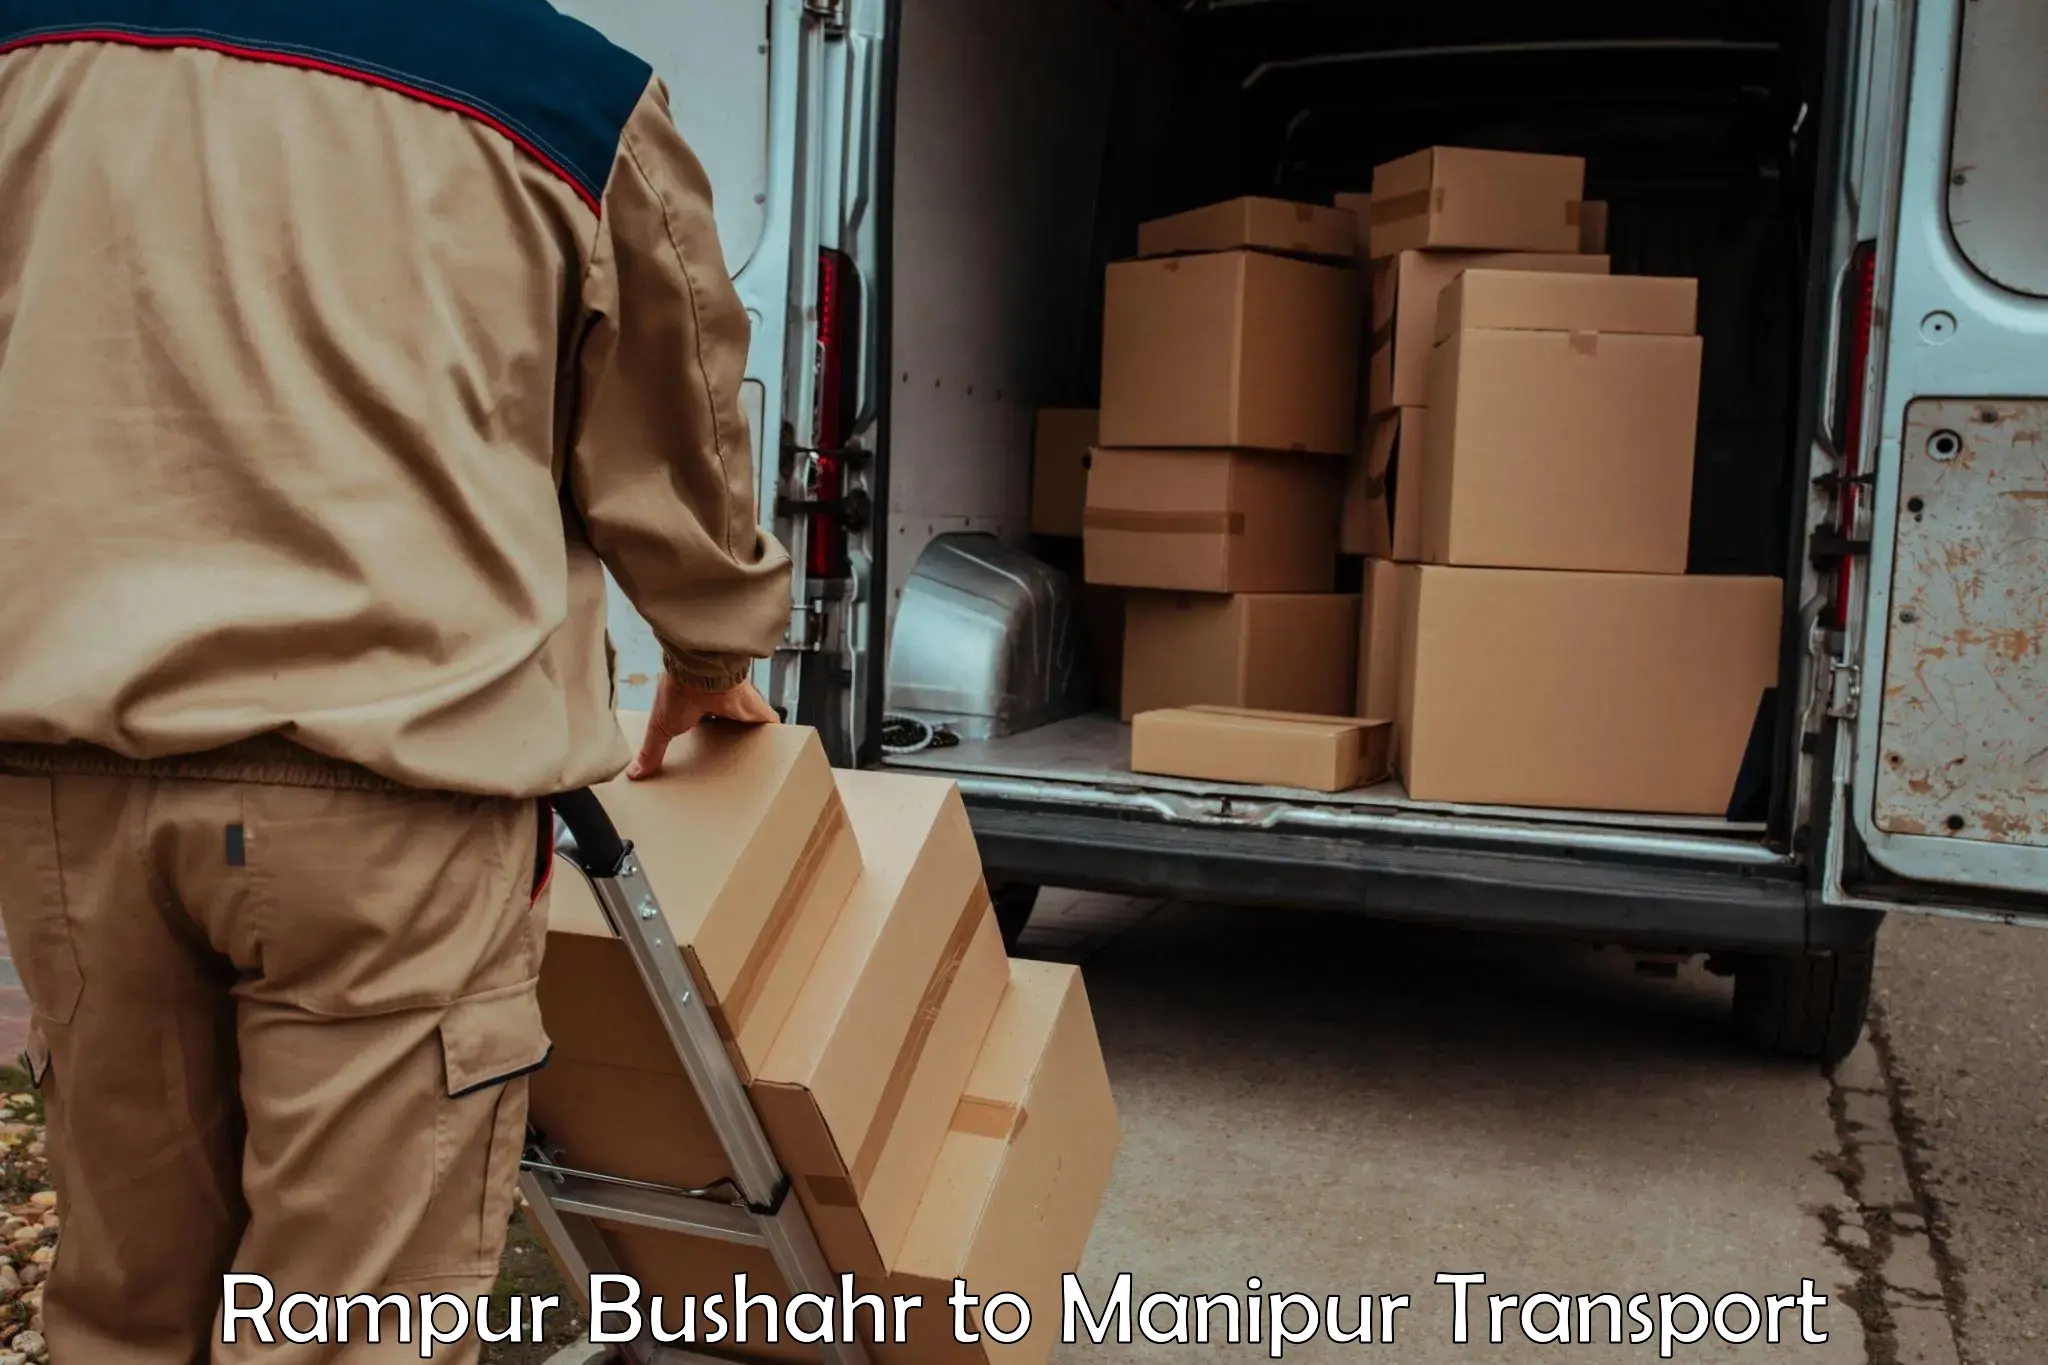 Container transport service Rampur Bushahr to Imphal